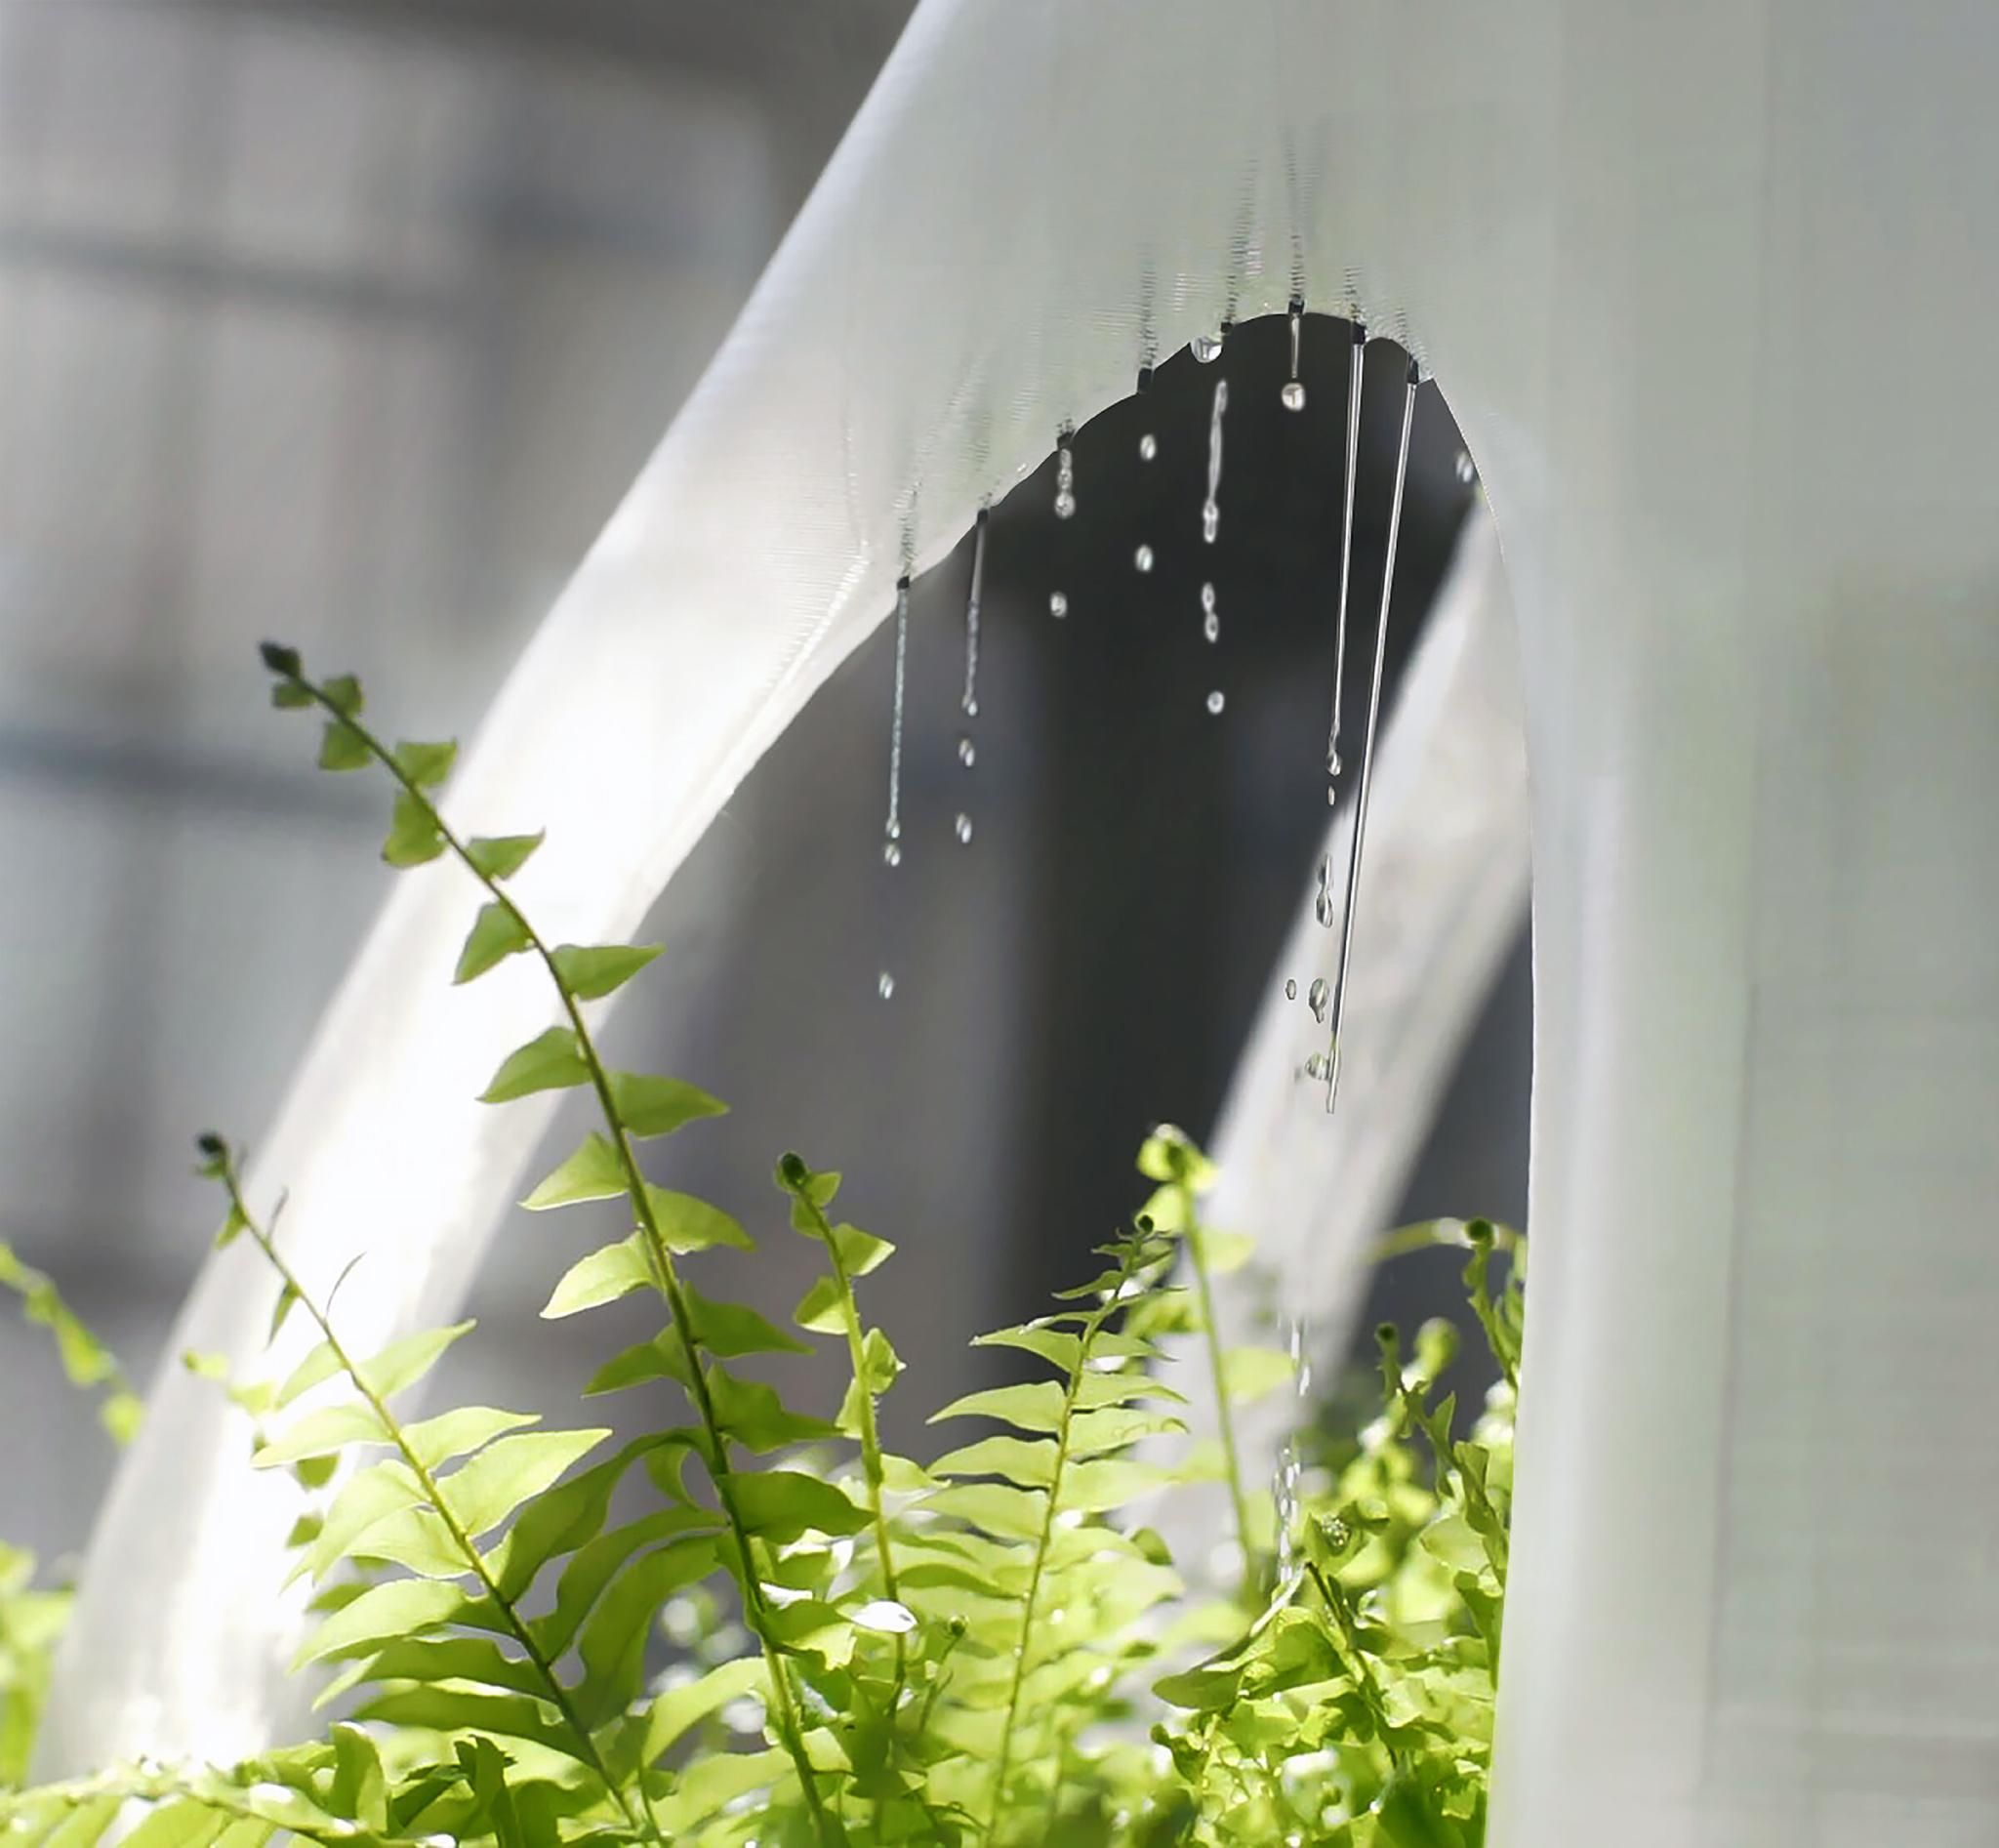 The world's first 3D printed irrigated green wall